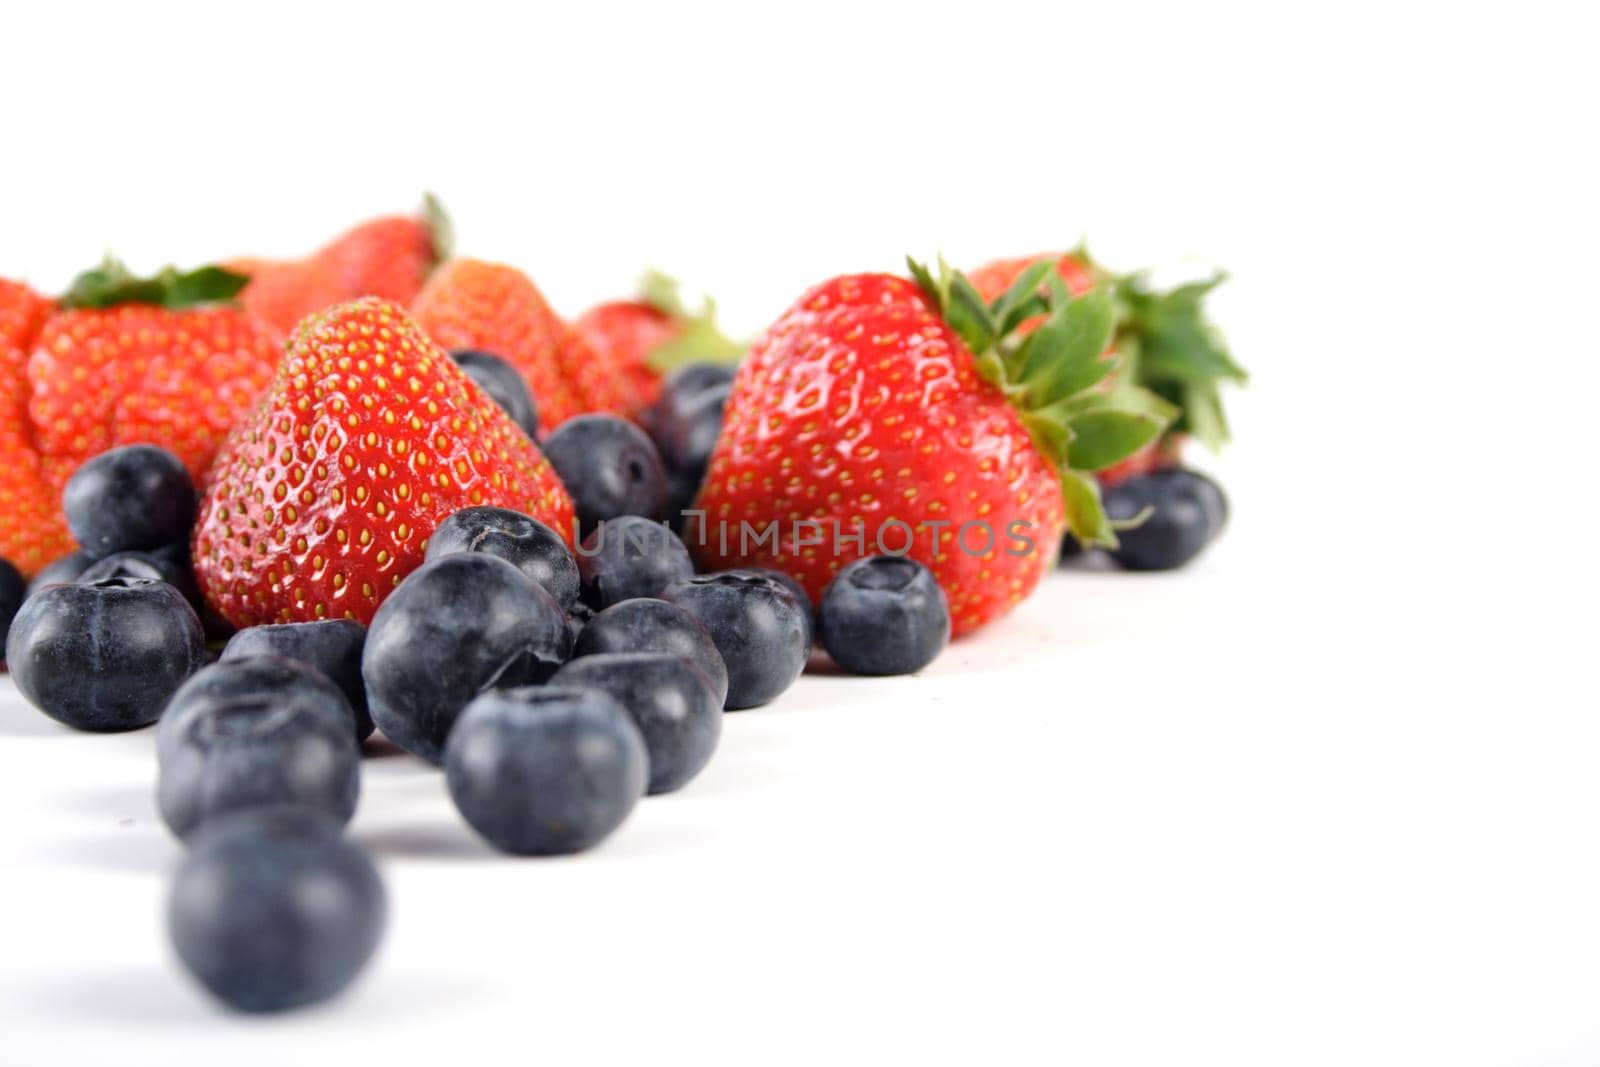 Blueberries and strawberries by moodboard